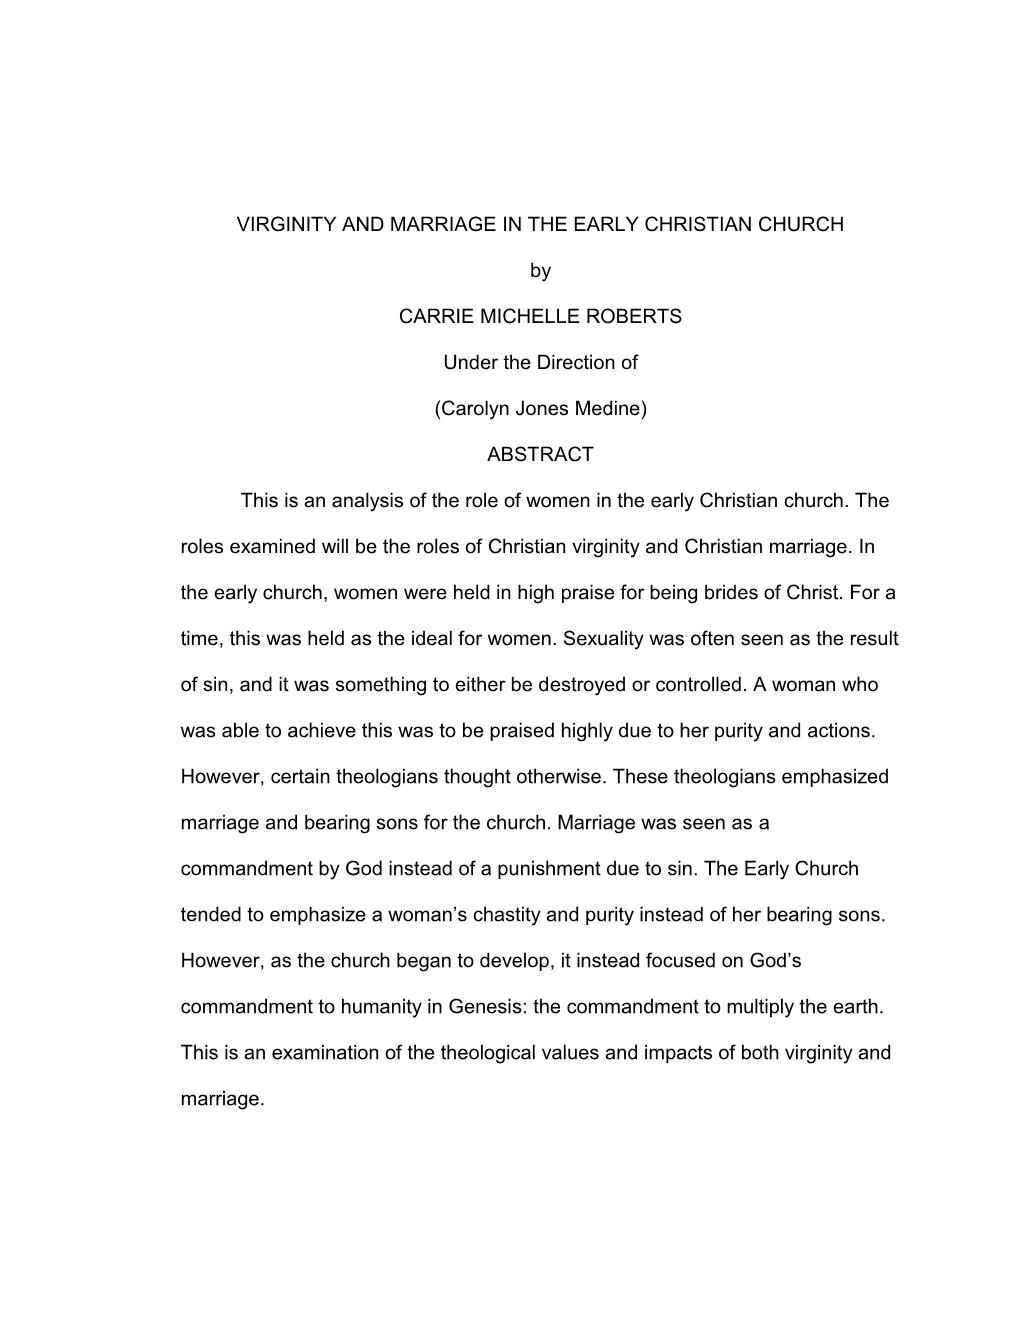 VIRGINITY and MARRIAGE in the EARLY CHRISTIAN CHURCH By